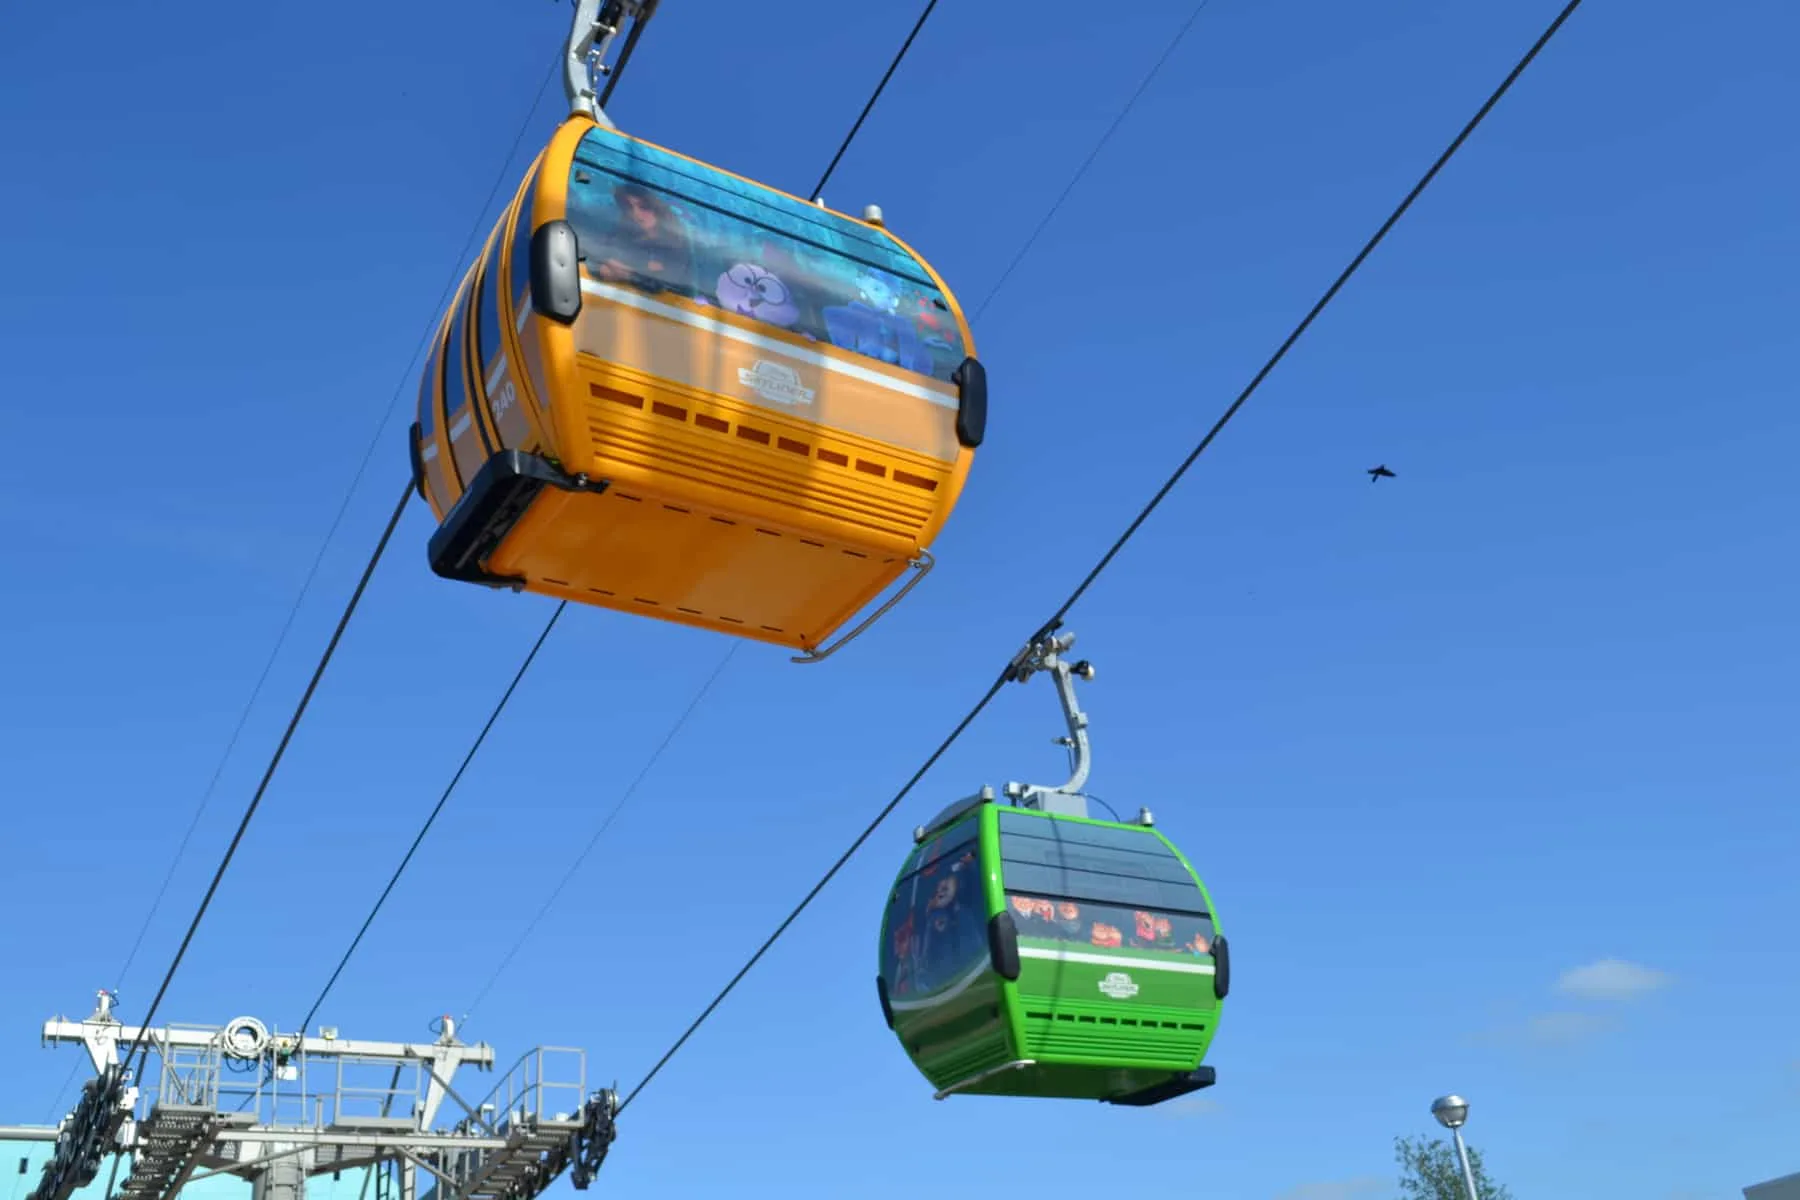 Everything you need to know about the Disney Skyliner